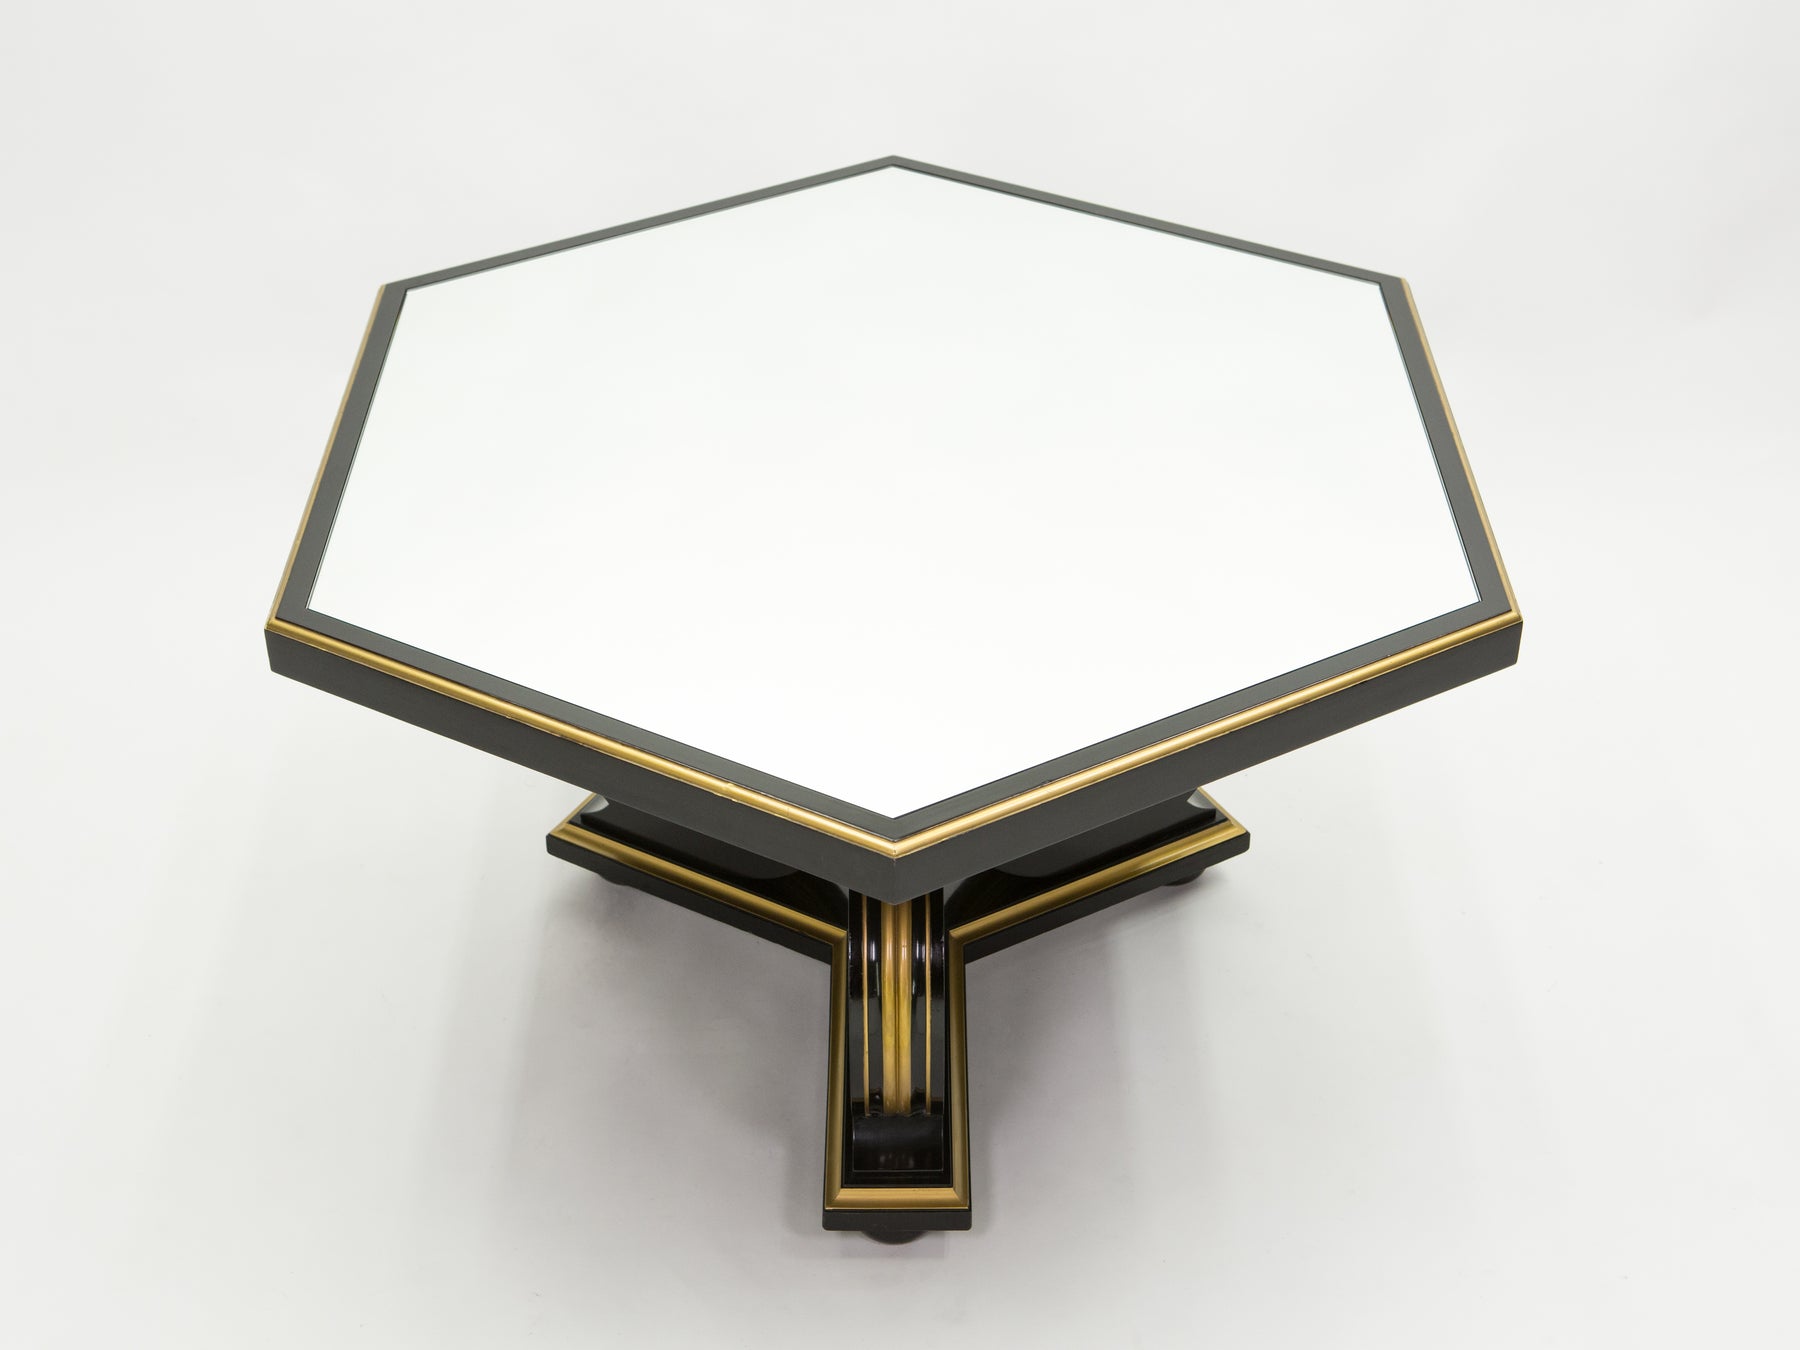 French Neoclassical Maurice Hirsch black gilded mirror table 1970s